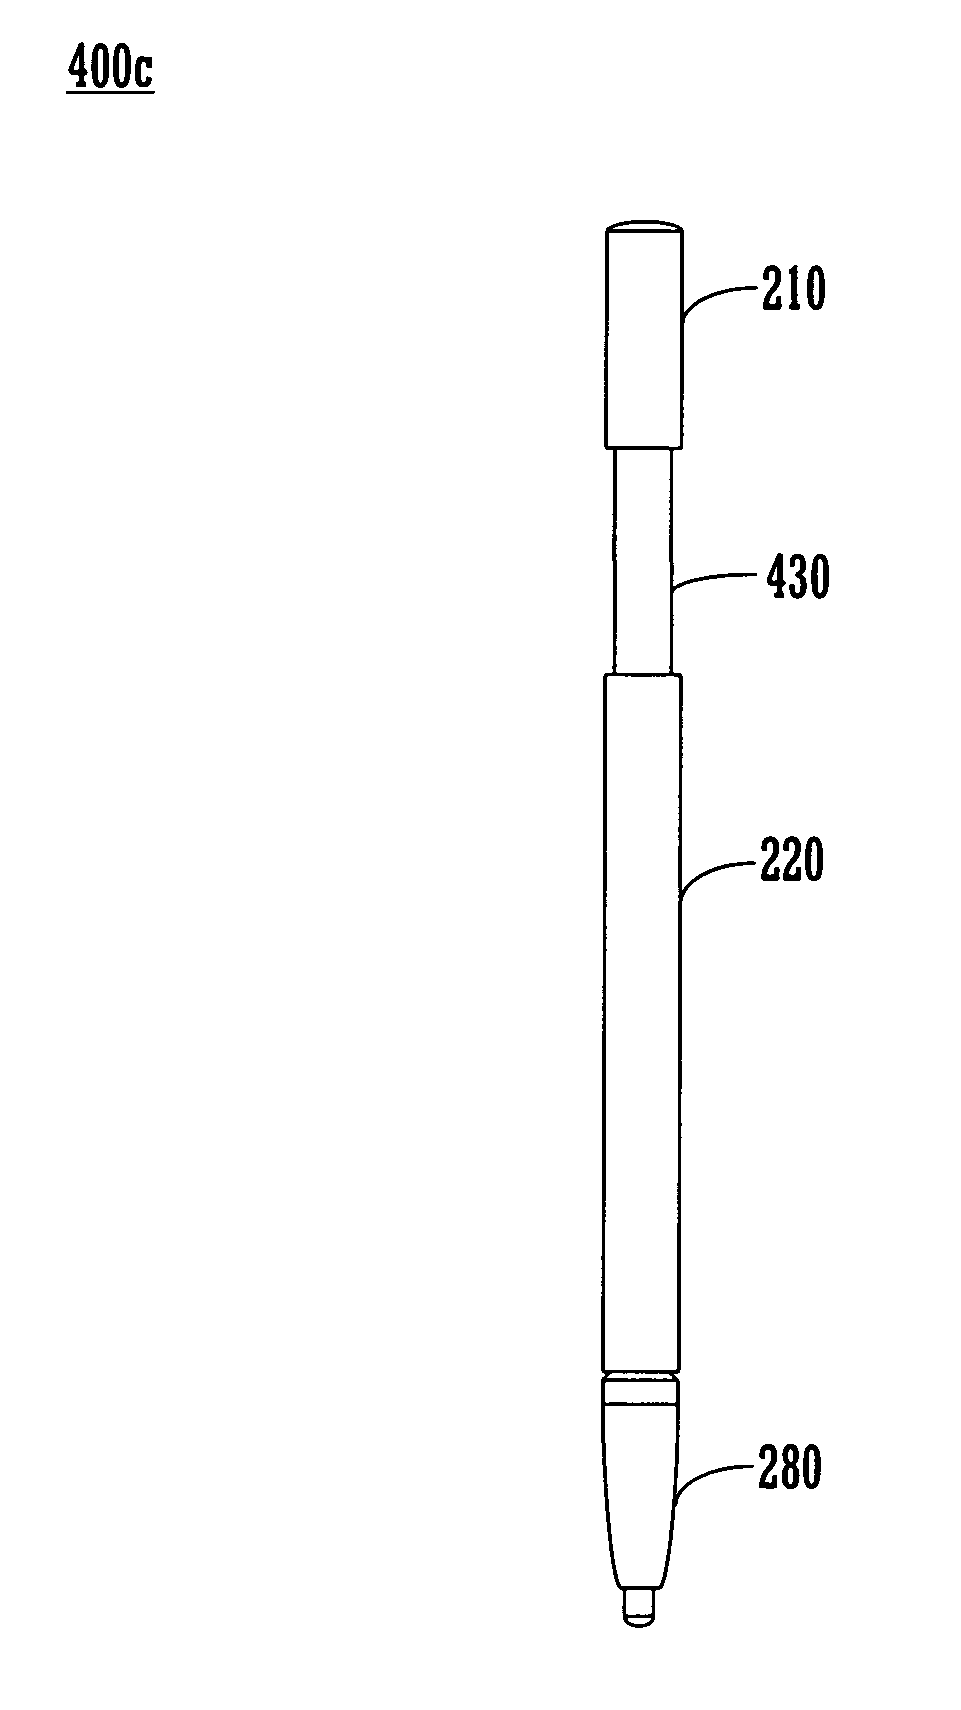 Expandable and contractible stylus